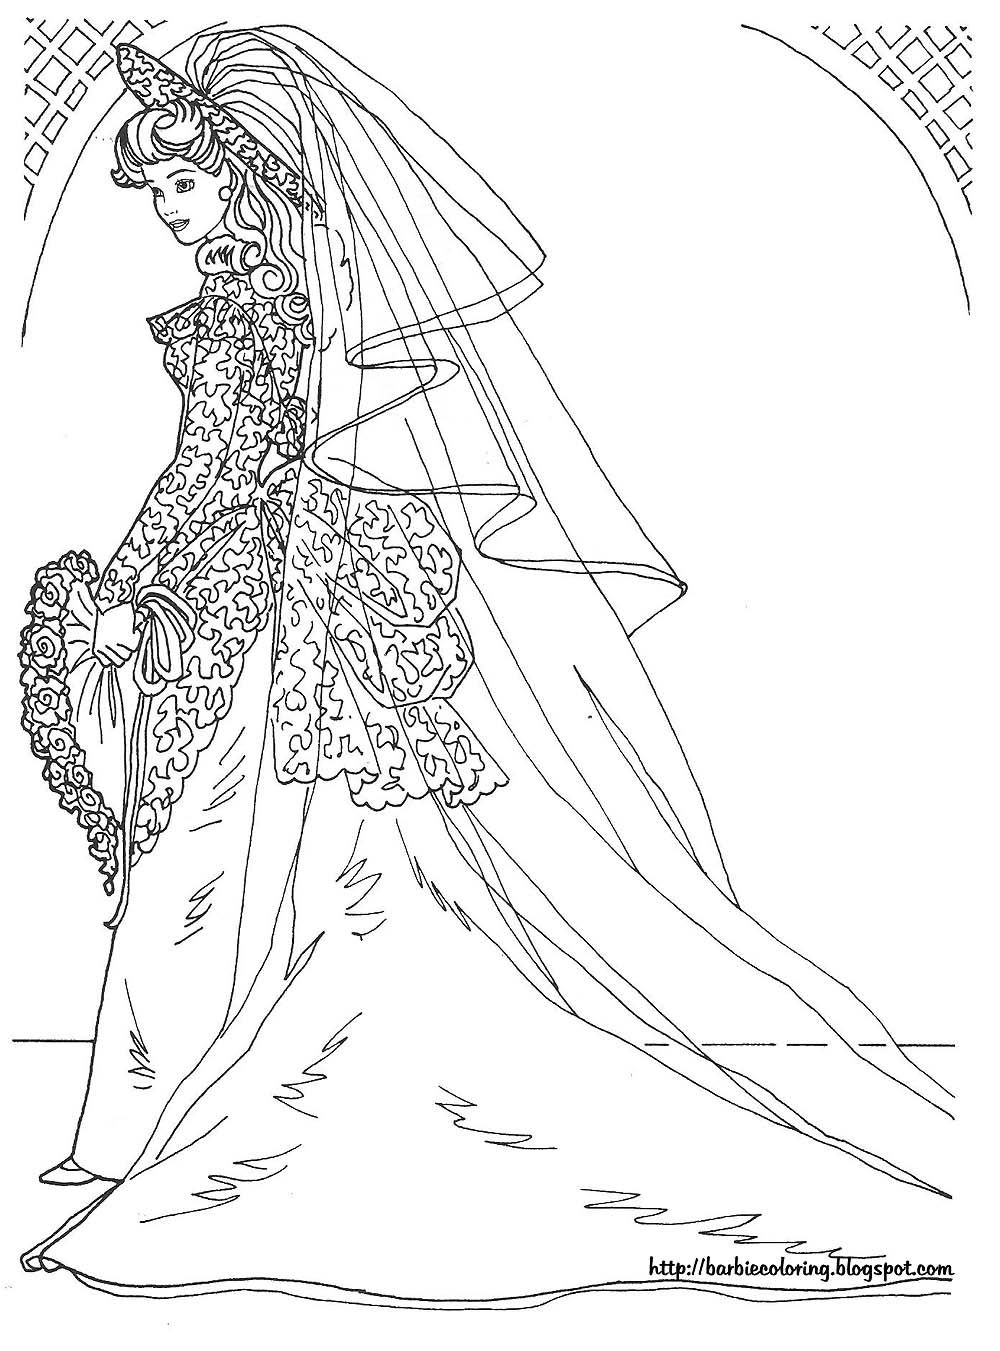 Barbie coloring pages barbie wedding dress coloring pages